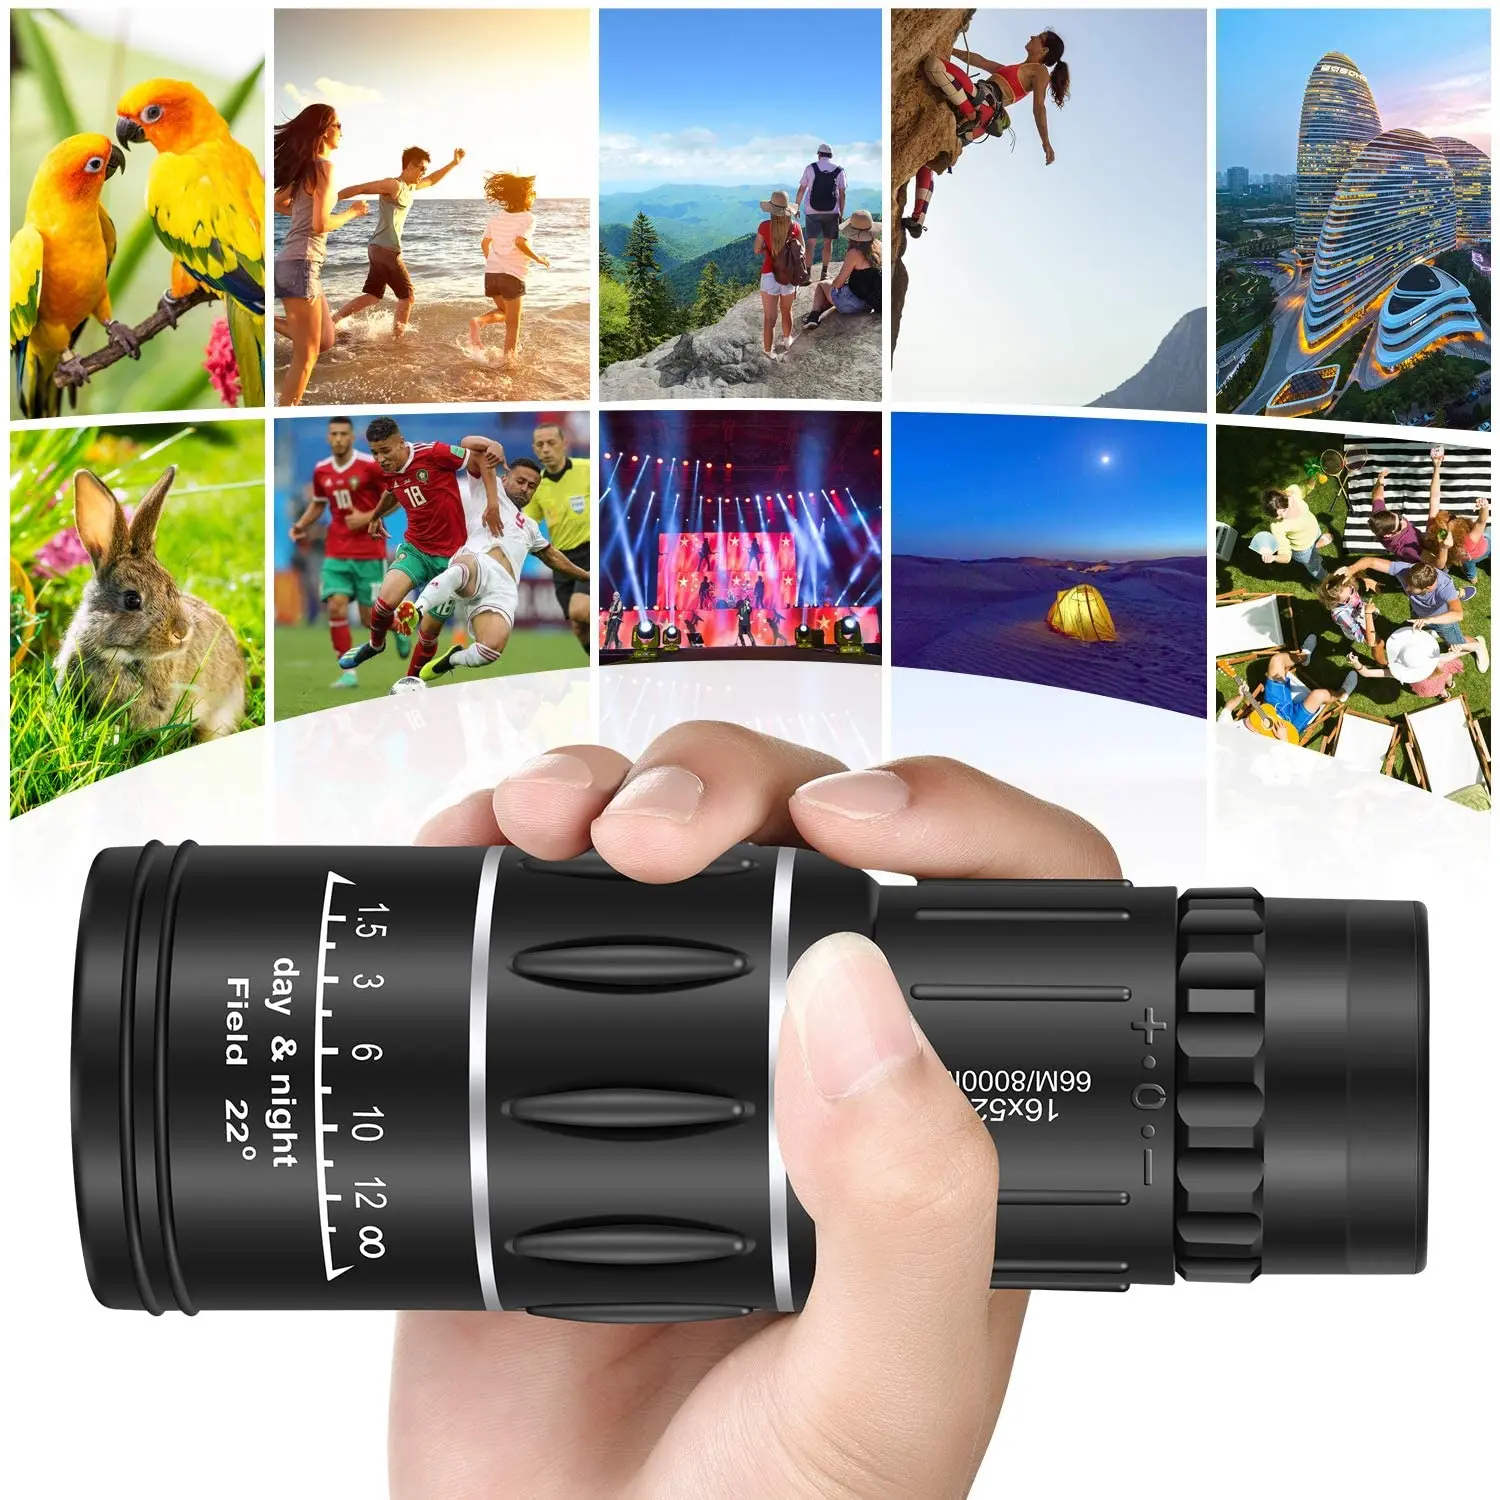 

16x52 Monocular Shimmer Night Vision Telescope Optical Spyglass Monocle Powerful for Outdoor Camping Bird Watch Hunting Spotting